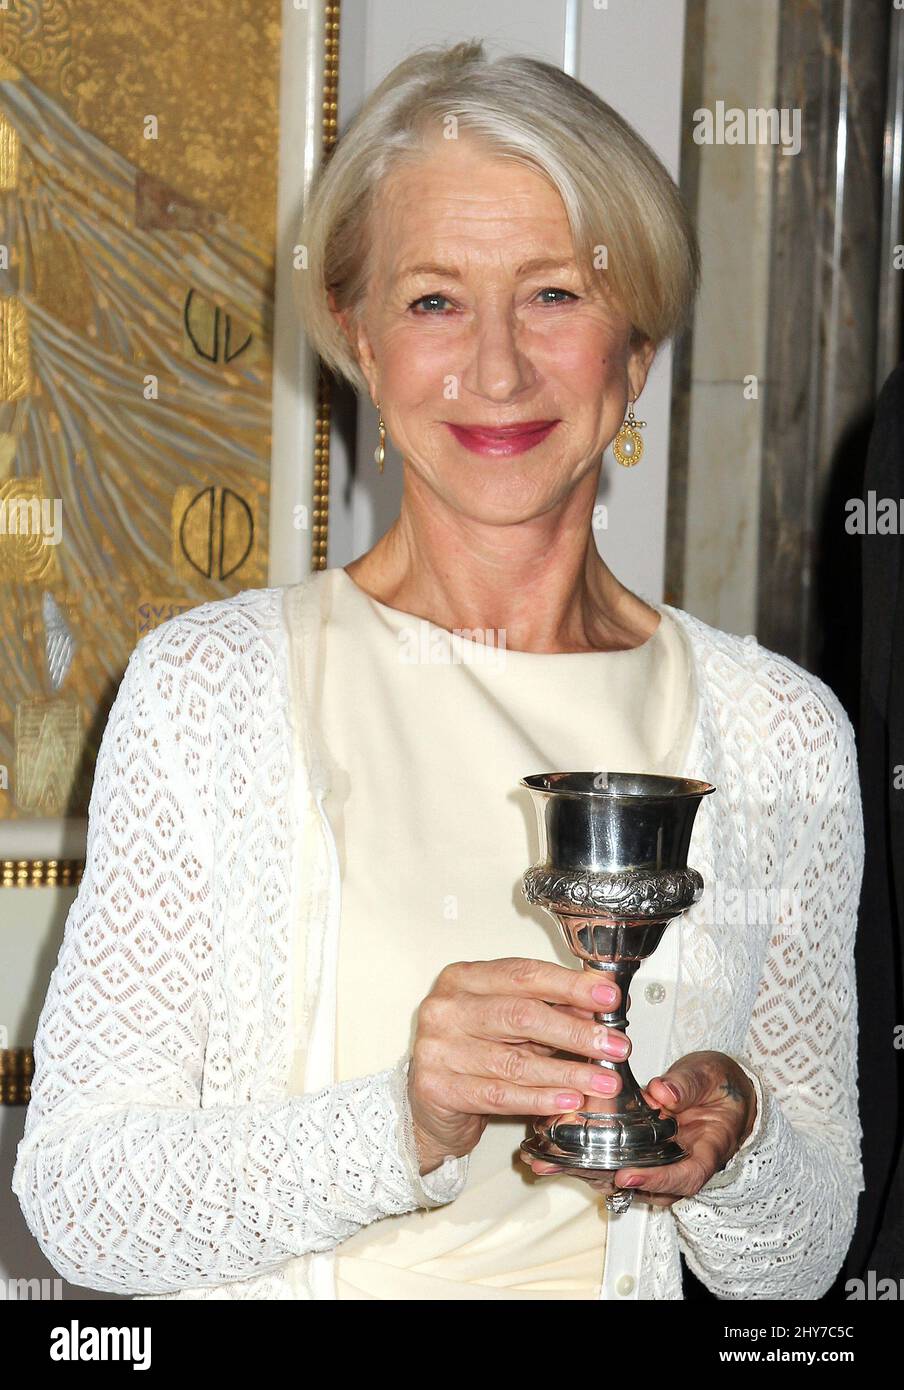 Helen Mirren attending a photocall honouring her role in 'Woman In Gold' at the Neue Galerie in New York. Stock Photo